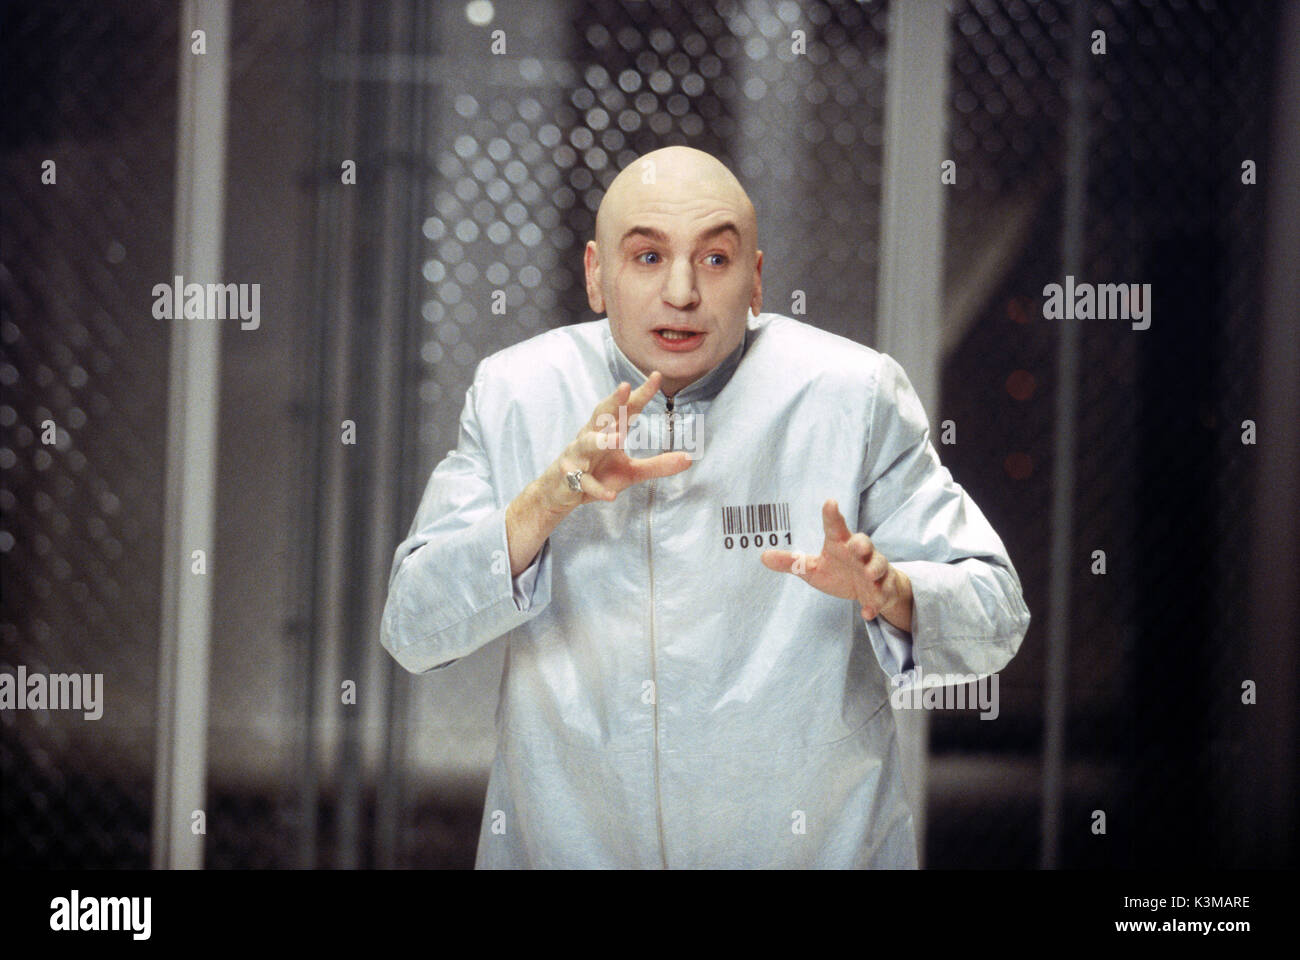 AUSTIN POWERS IN GOLDMEMBER [US 2002] MIKE MYERS as Dr Evil     Date: 2002 Stock Photo